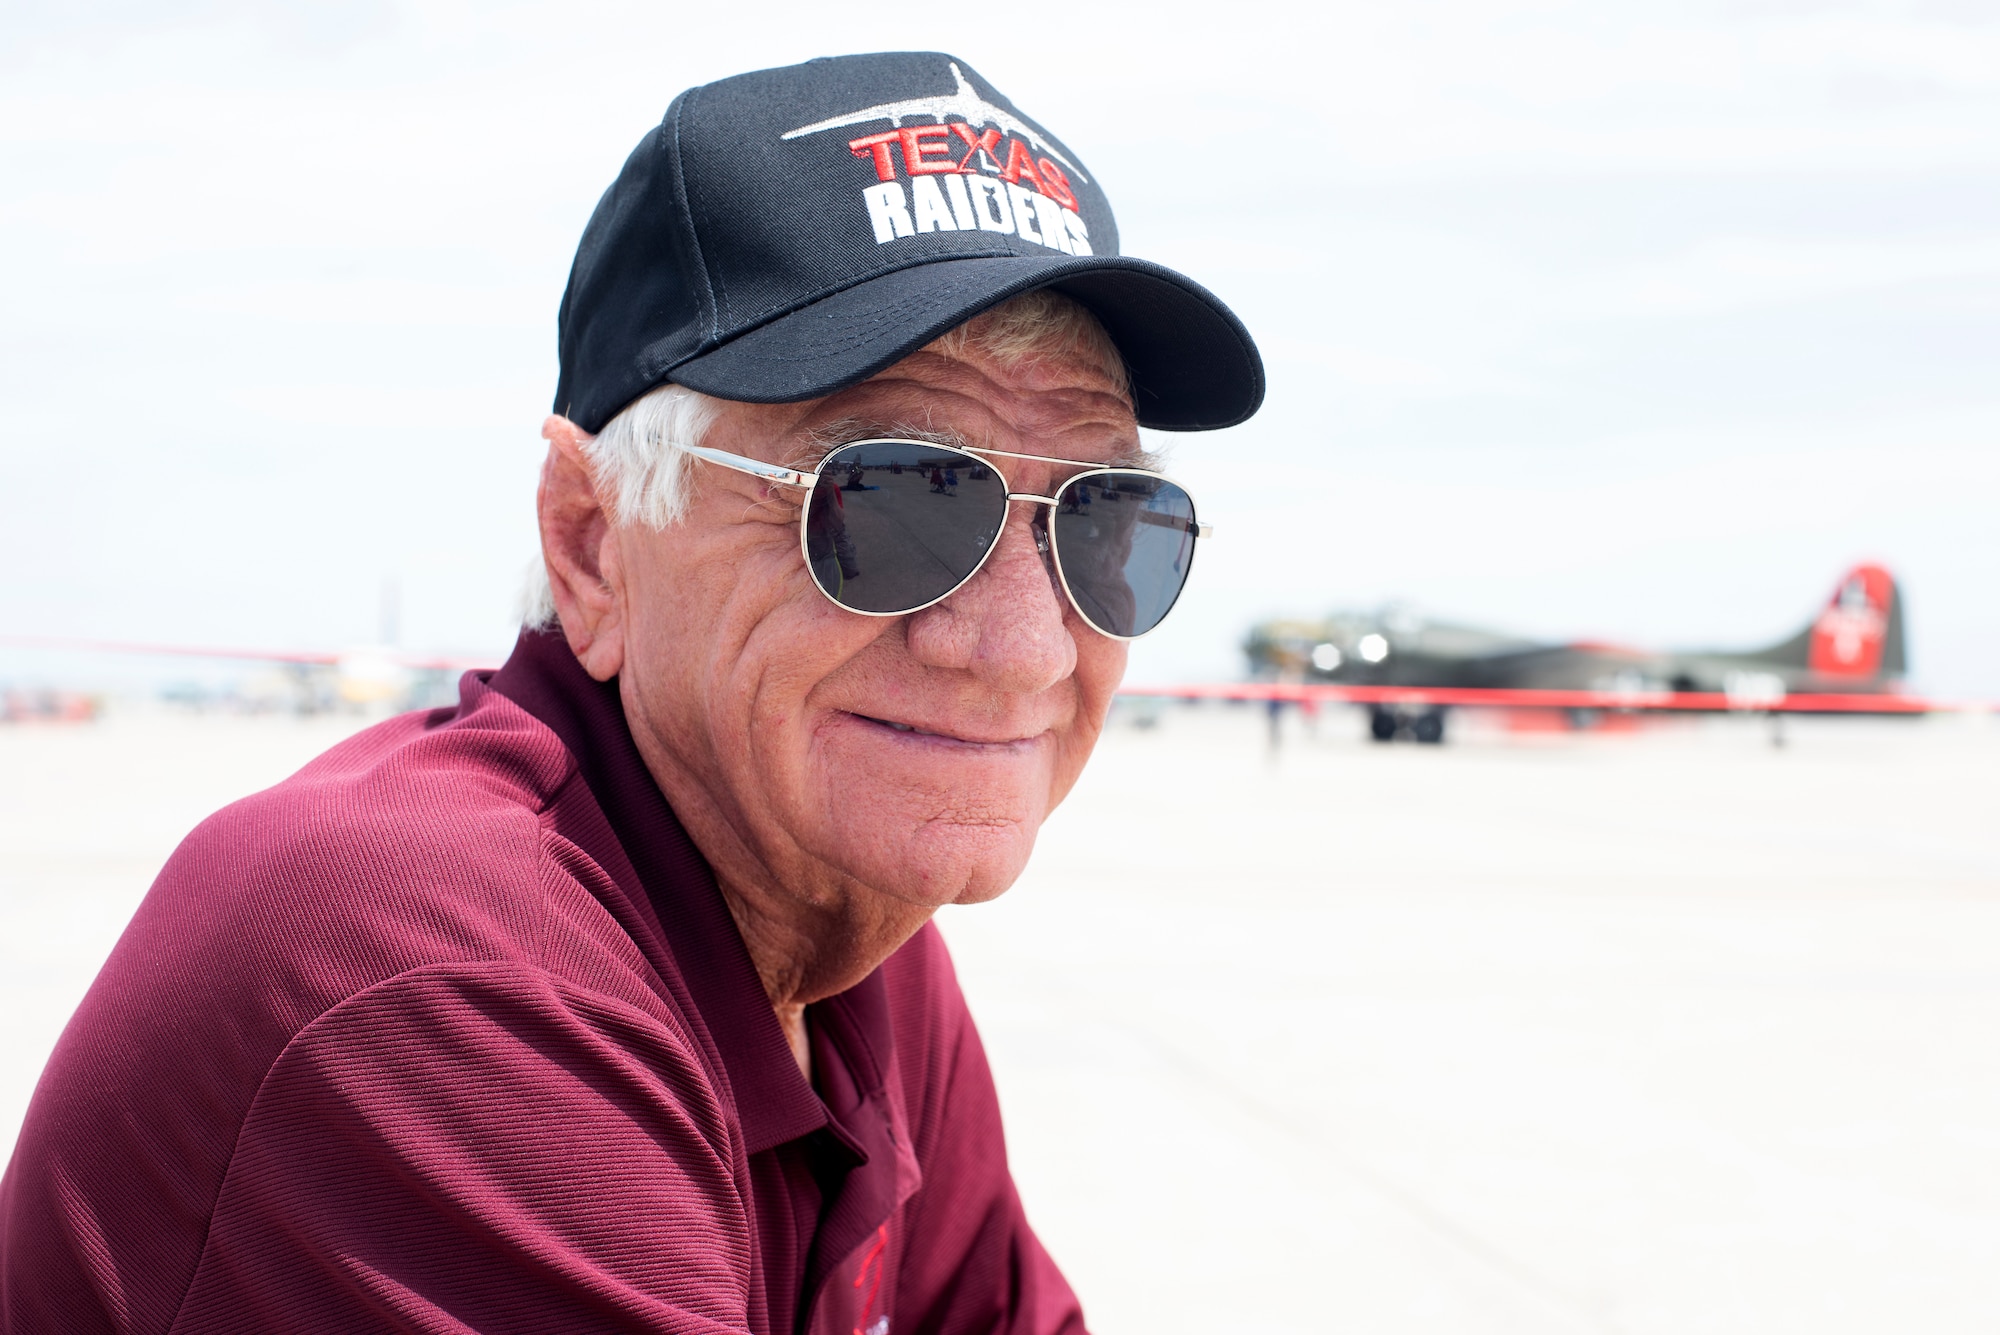 Dan Smith, a Golden, Missouri, native, poses for a portrait in front of a B-17 Flying Fortress on June 15, 2019, at Whiteman Air Force Base, Missouri. Smith and his wife have gone to more than 50 other air shows before attending the 2019 Wings Over Whiteman Air and Space Show. (U.S. Air Force photo by Staff Sgt. Kayla White)